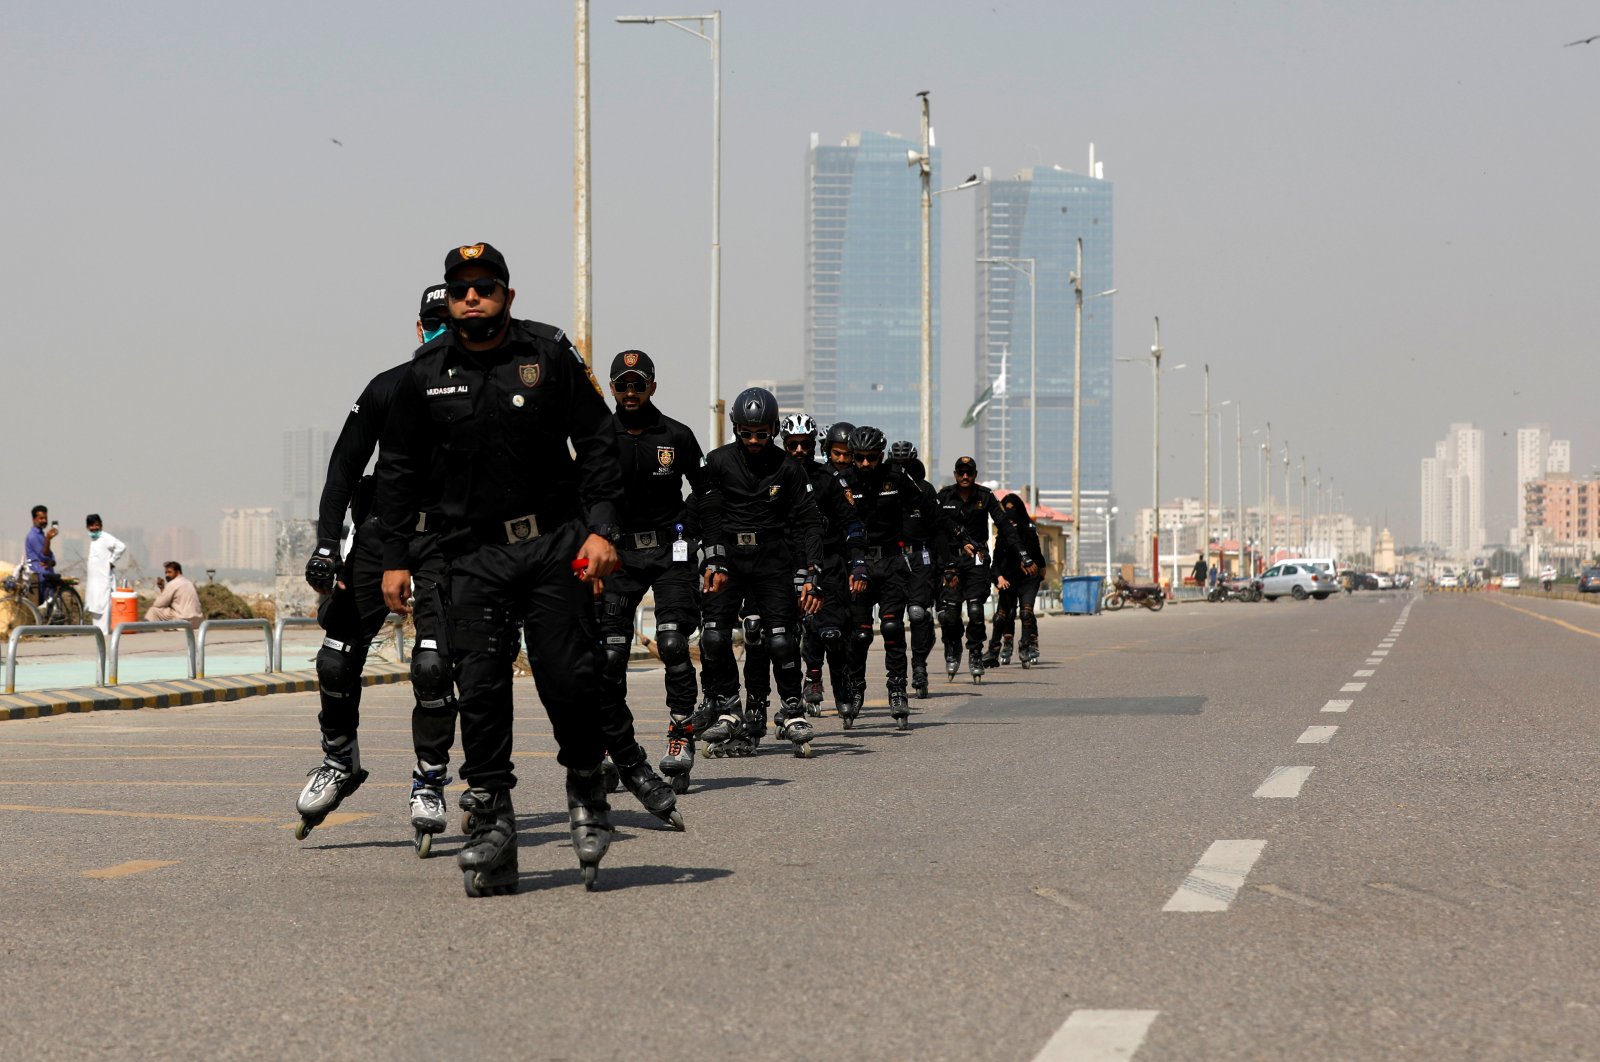 Special Security Unit (SSU) police members rollerblade during practice along the seafront in Karachi, Pakistan, Feb. 19, 2021. (Reuters Photo)